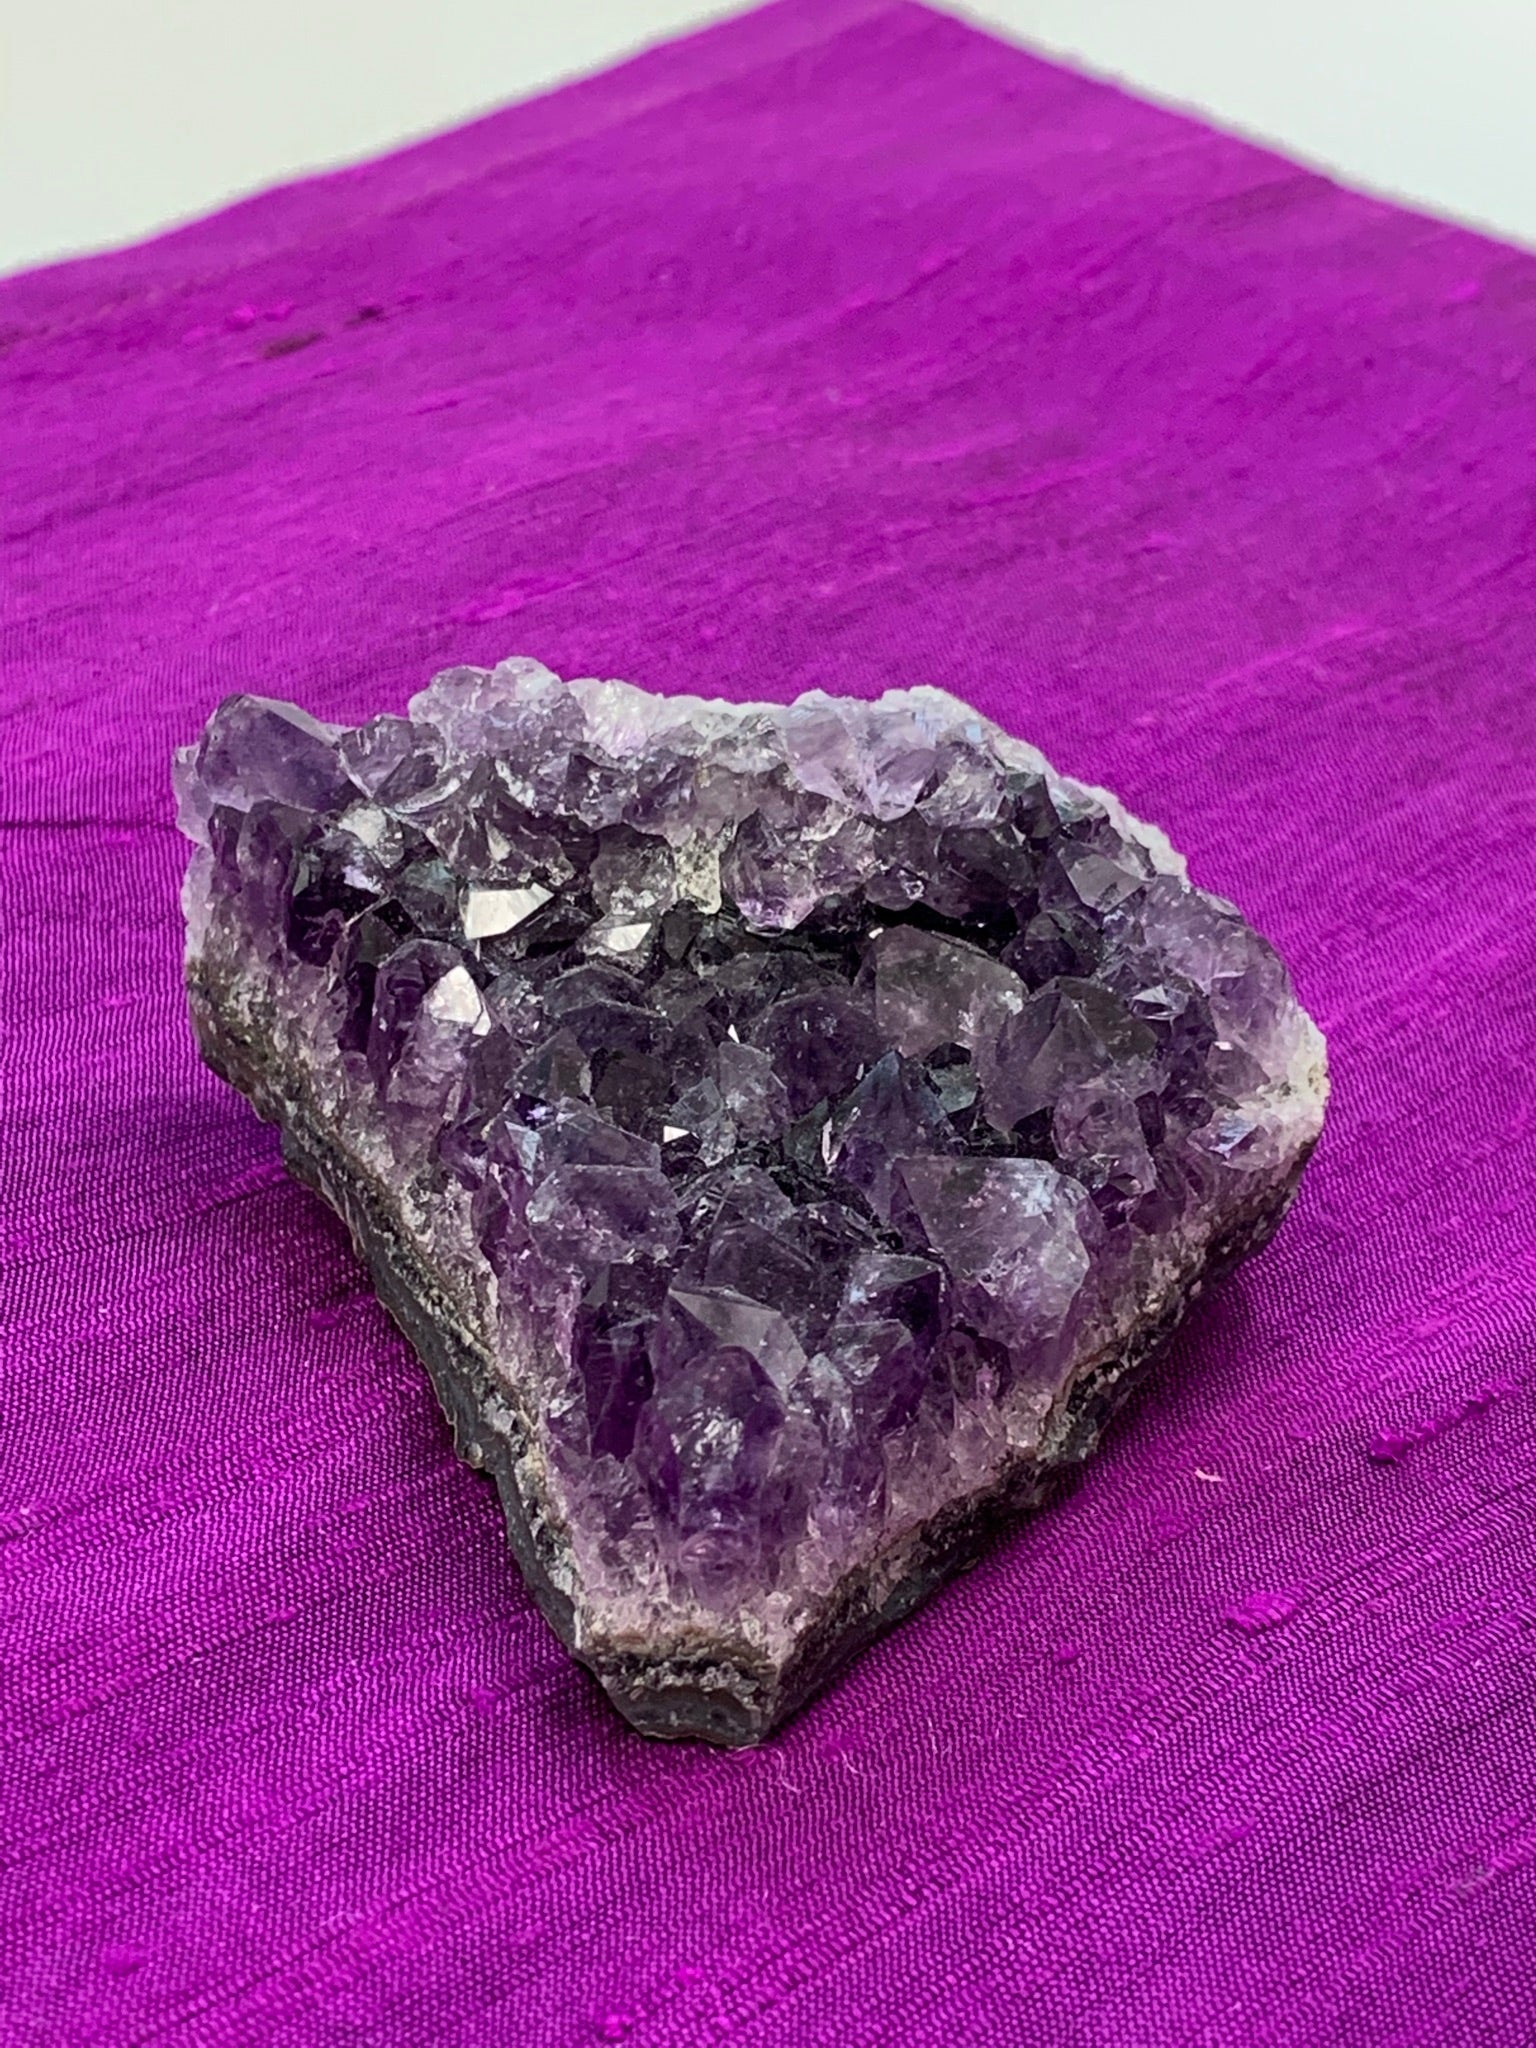 close-up view of amethyst geode piece - great quality and color. Size varies, but the average weight is 4.4oz. Each piece is unique in shape.